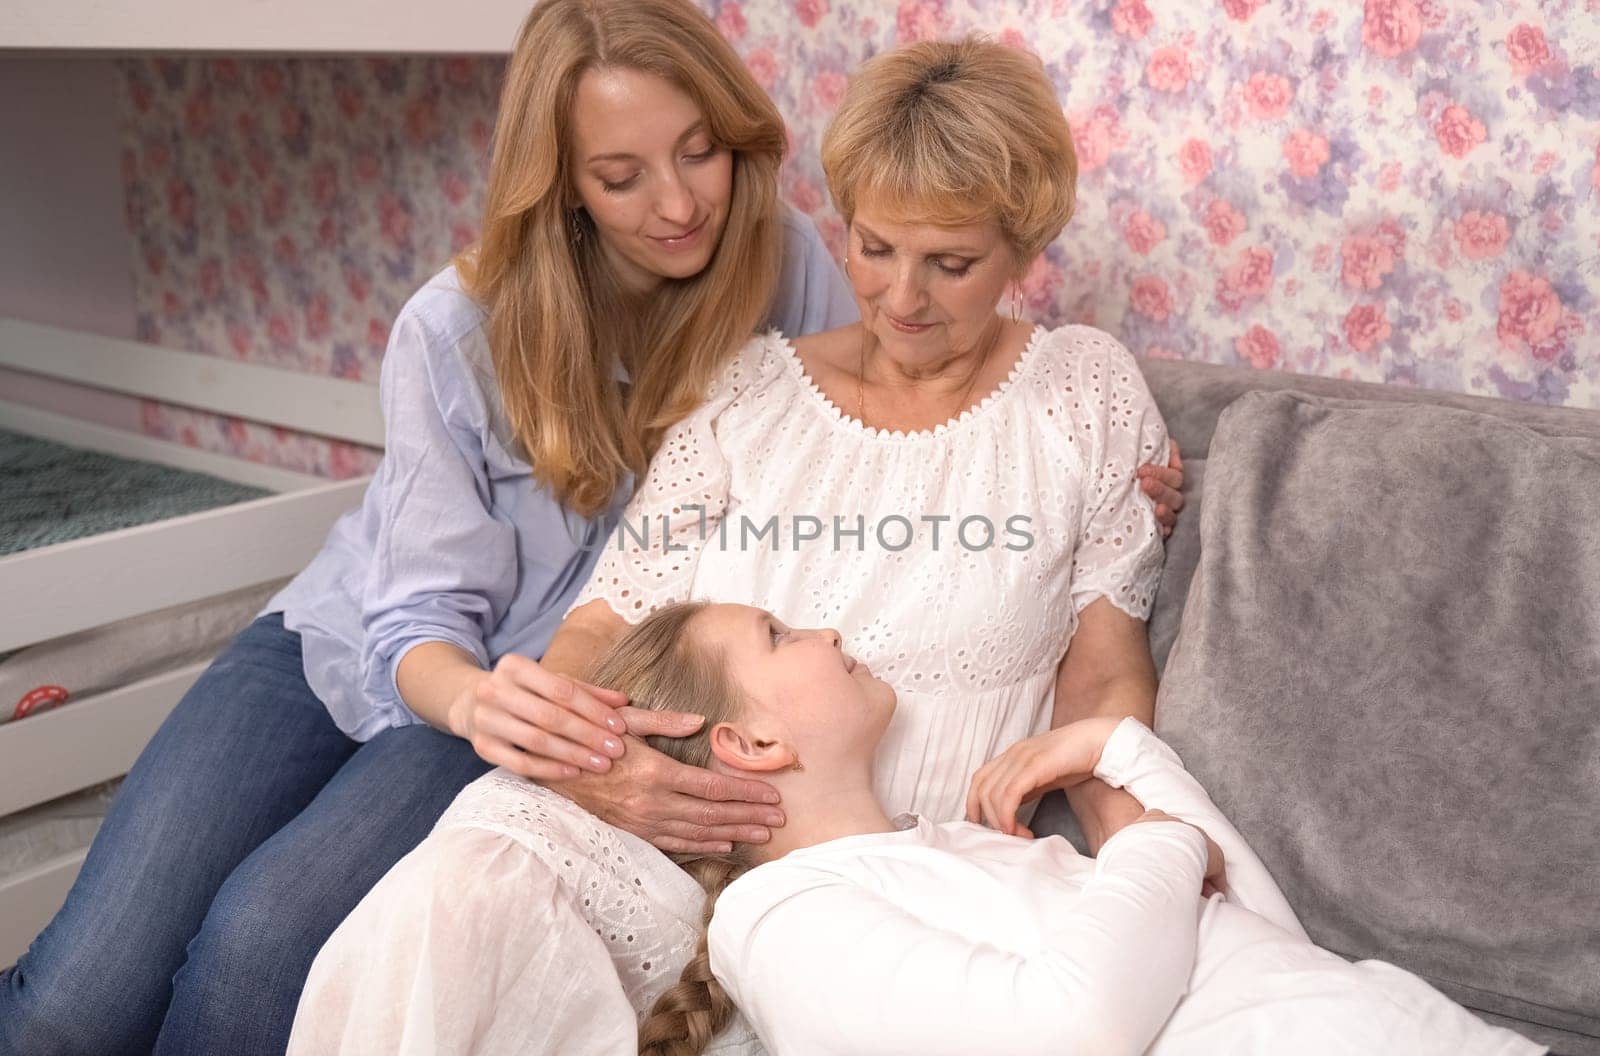 The granddaughter lies on her grandmother's legs, look smiling at her mother and grandmother. A happy family.